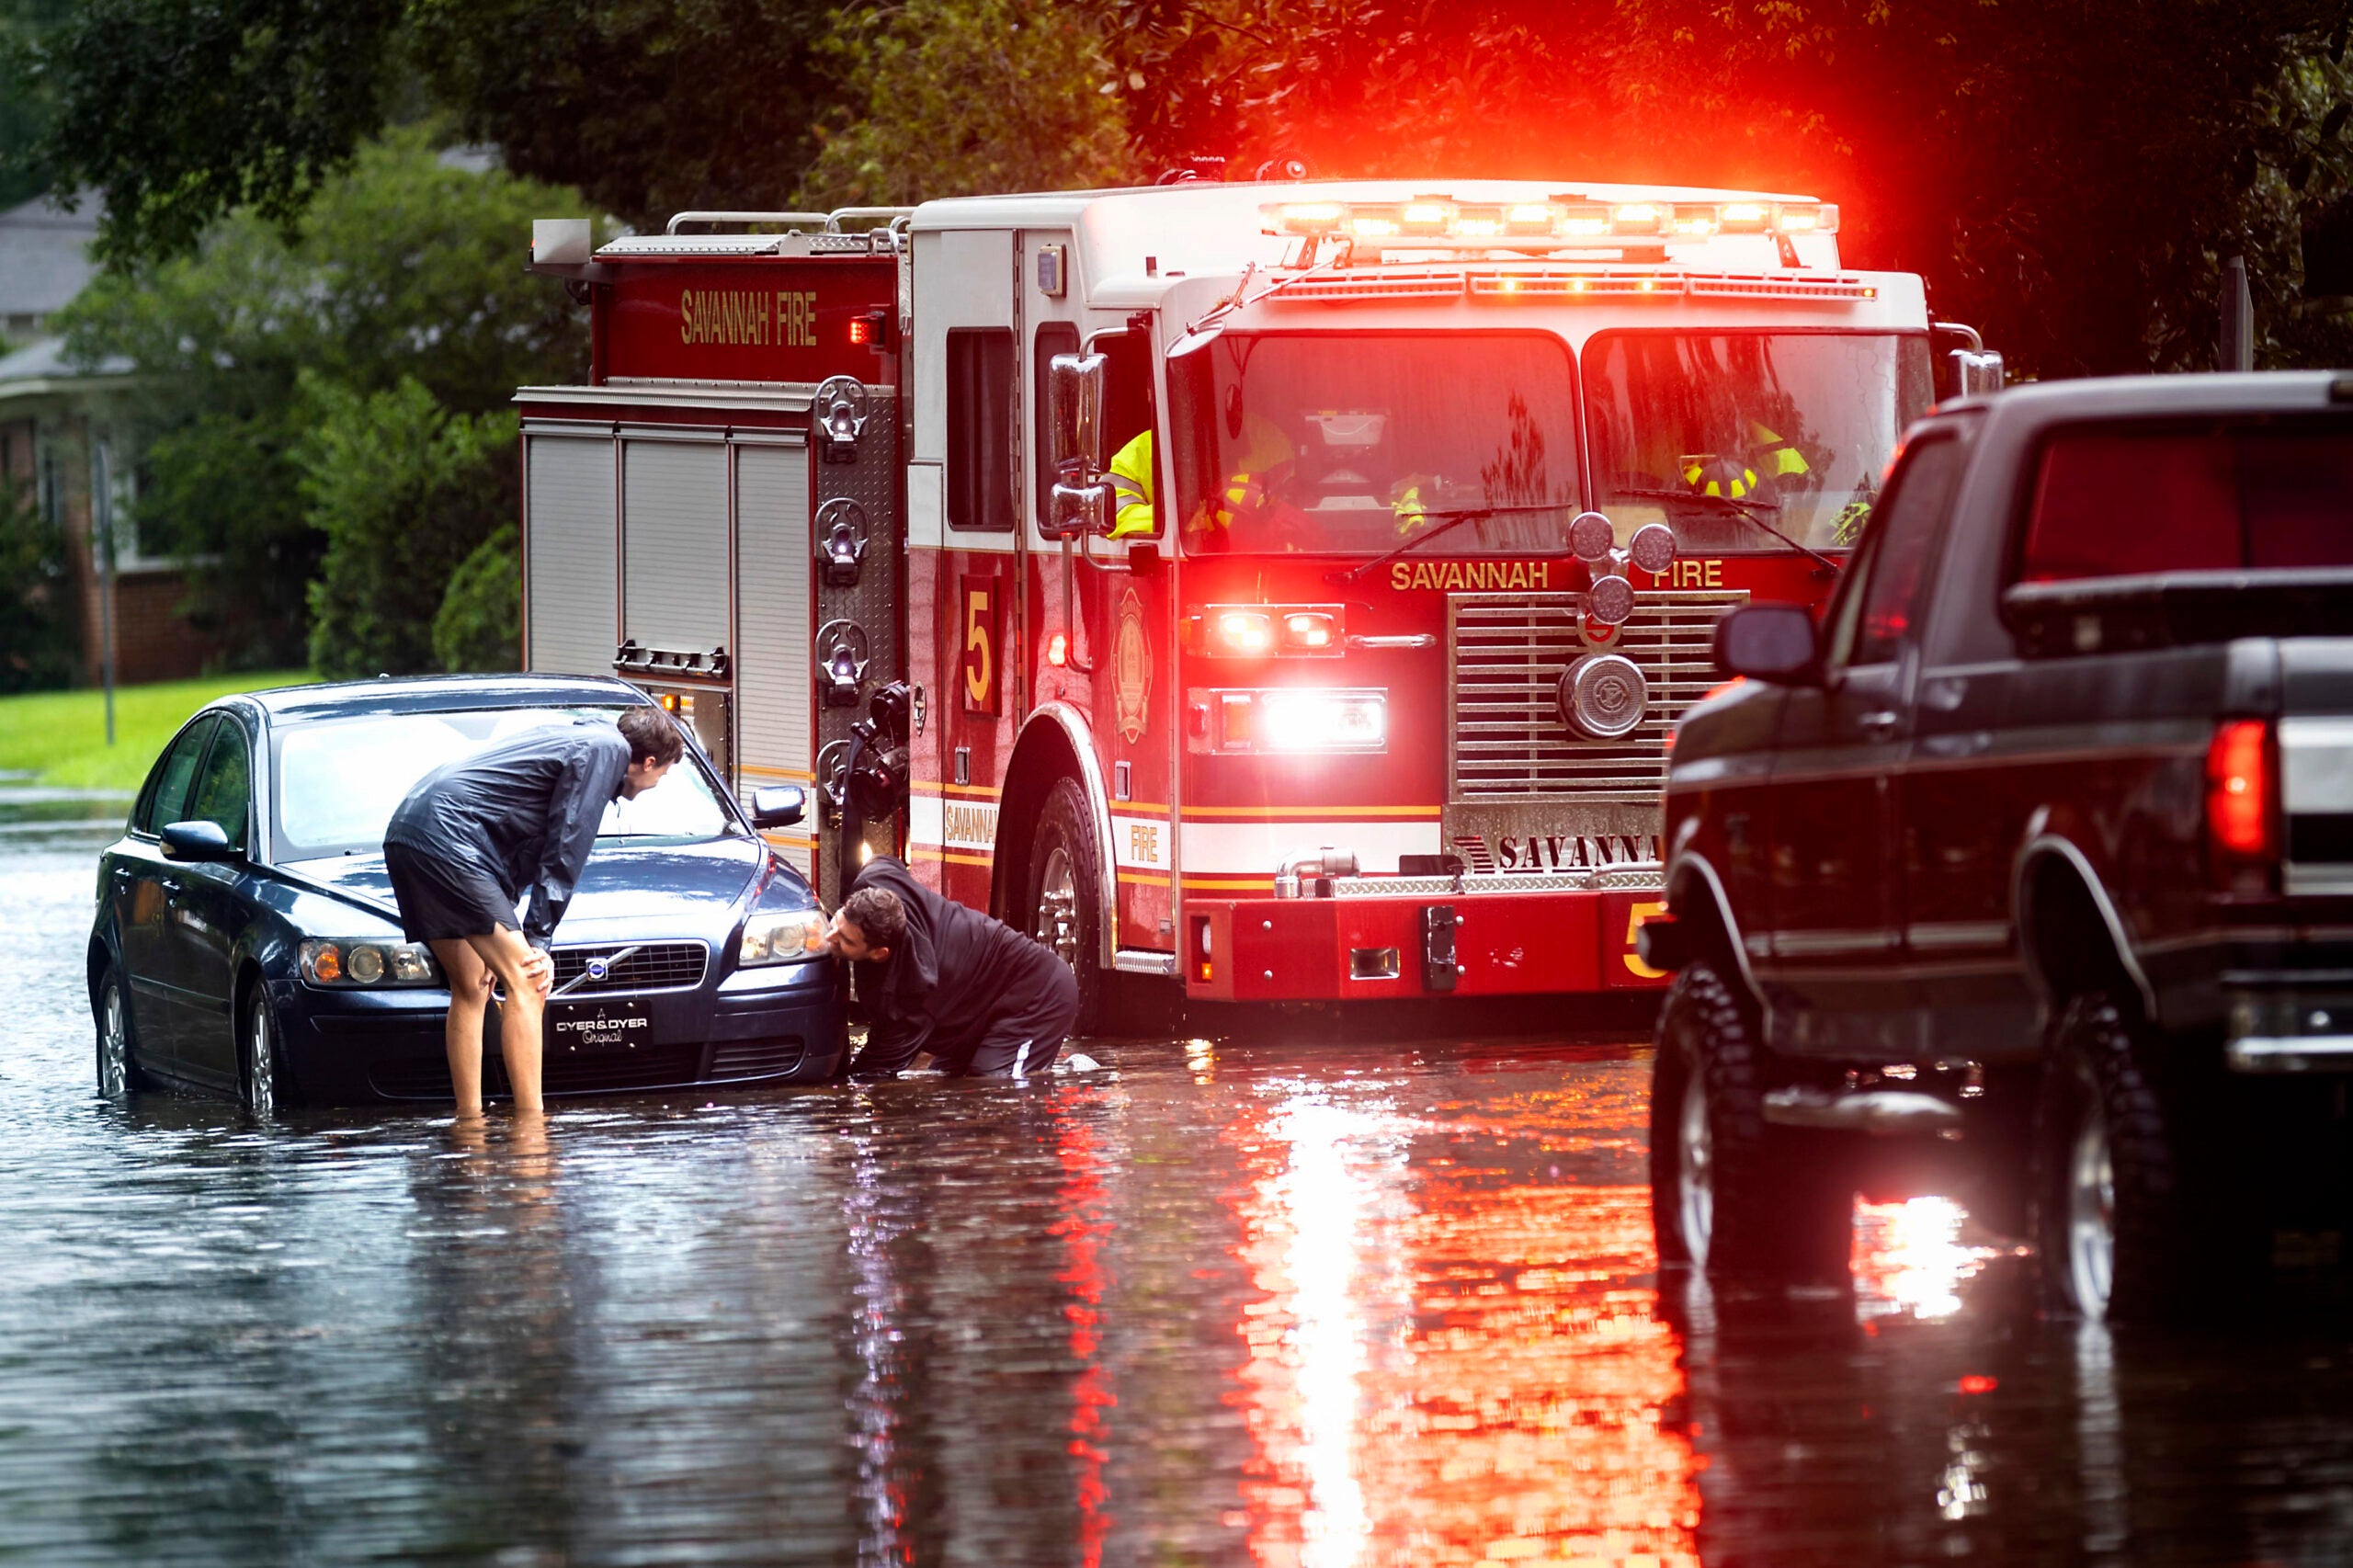 People attach a towline to a stranded vehicle on a flooded street after heavy rain from Tropical Storm Debby.